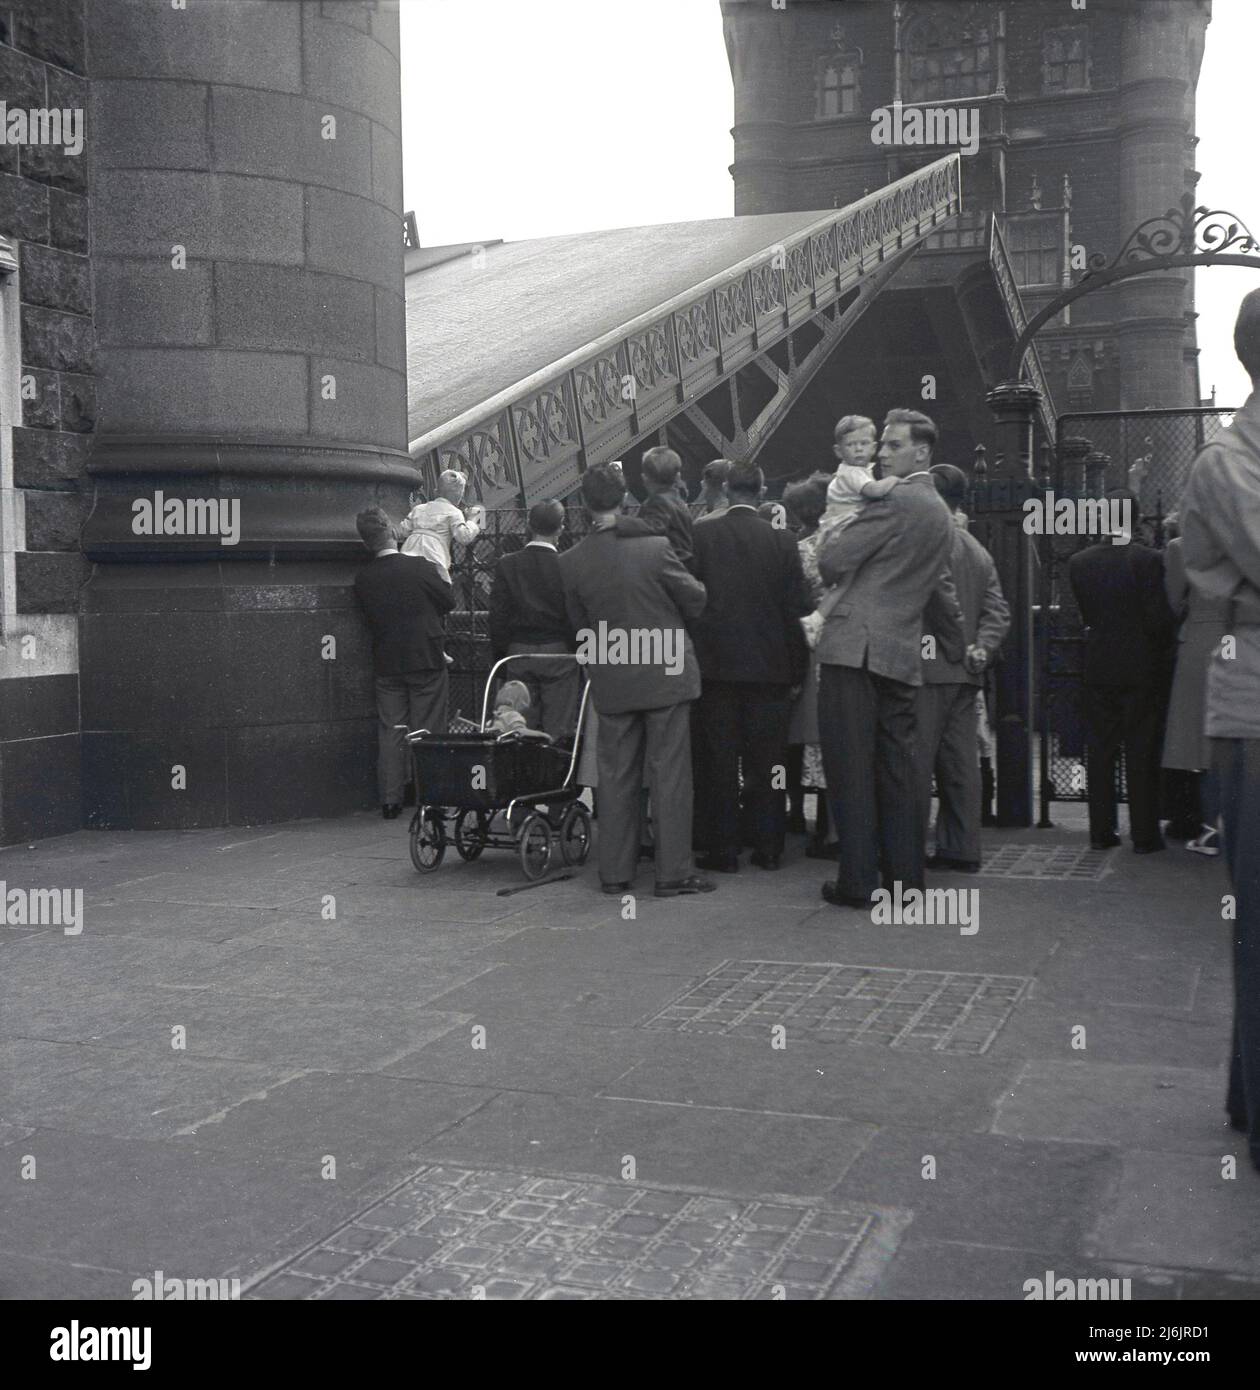 1953, historical, people gathered by one of the towers on Tower Bride watching the middle of the bridge being raised, London, England, UK. One of London's most famous atttractions, the combined bascule and suspension bridge crosses the River Thames and was opened in 1894. Stock Photo